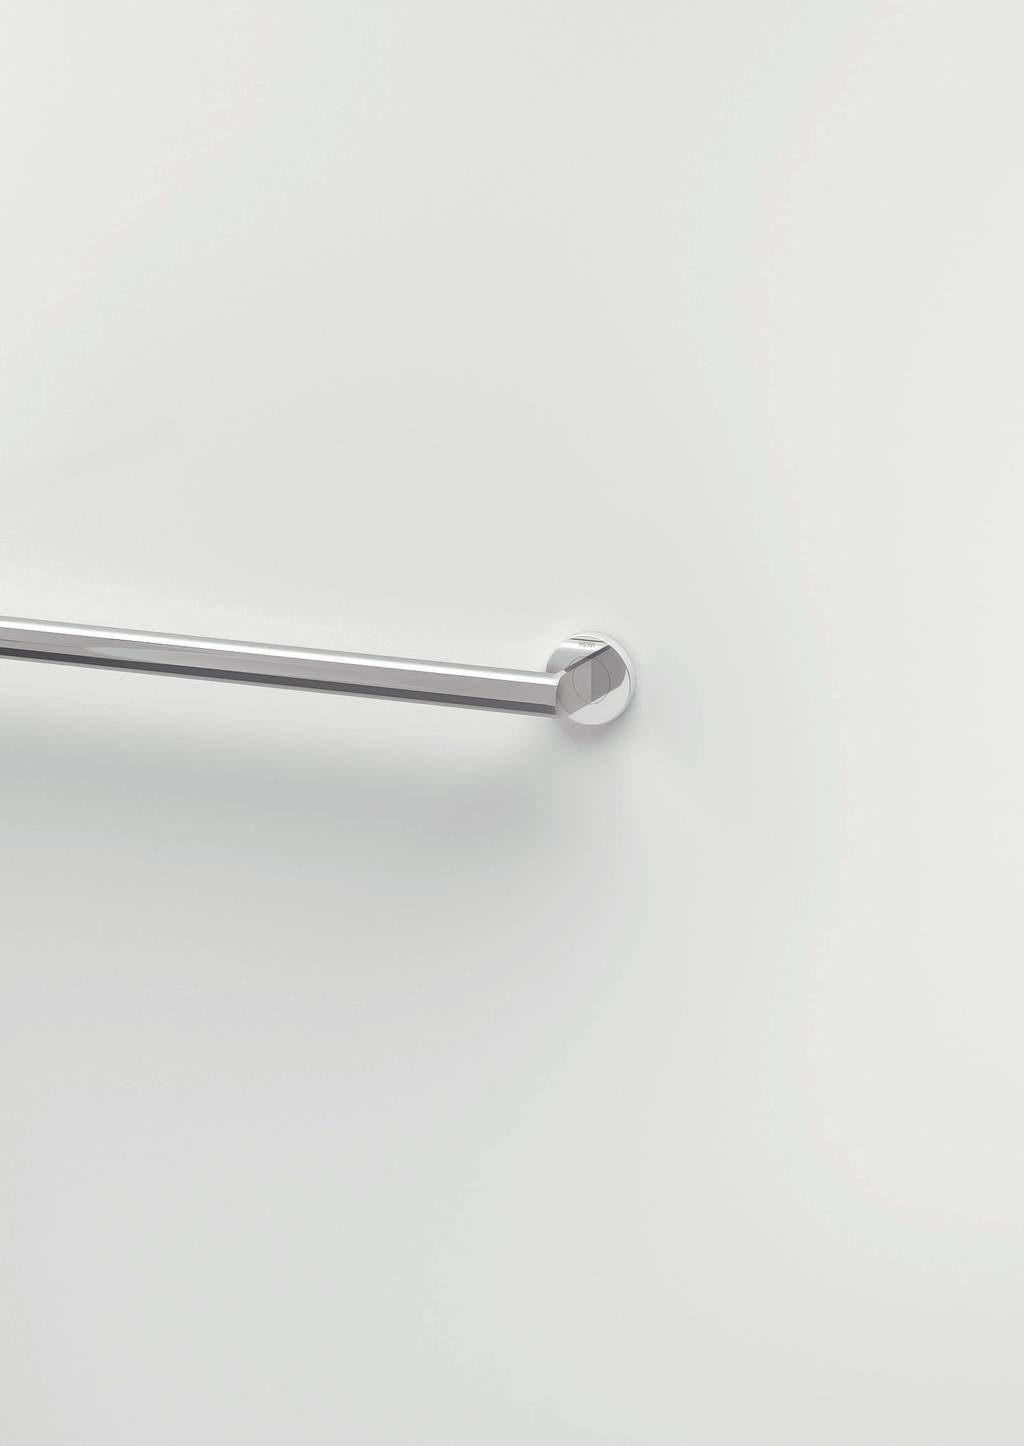 DESIGN OPTIONS Two diameters (Support rails ø 32 or 30 mm, rails with shower head holder ø 32 or 25 mm) two surfaces (satin finished stainless steel, high-polished chrome) CUSTOMISED Customised